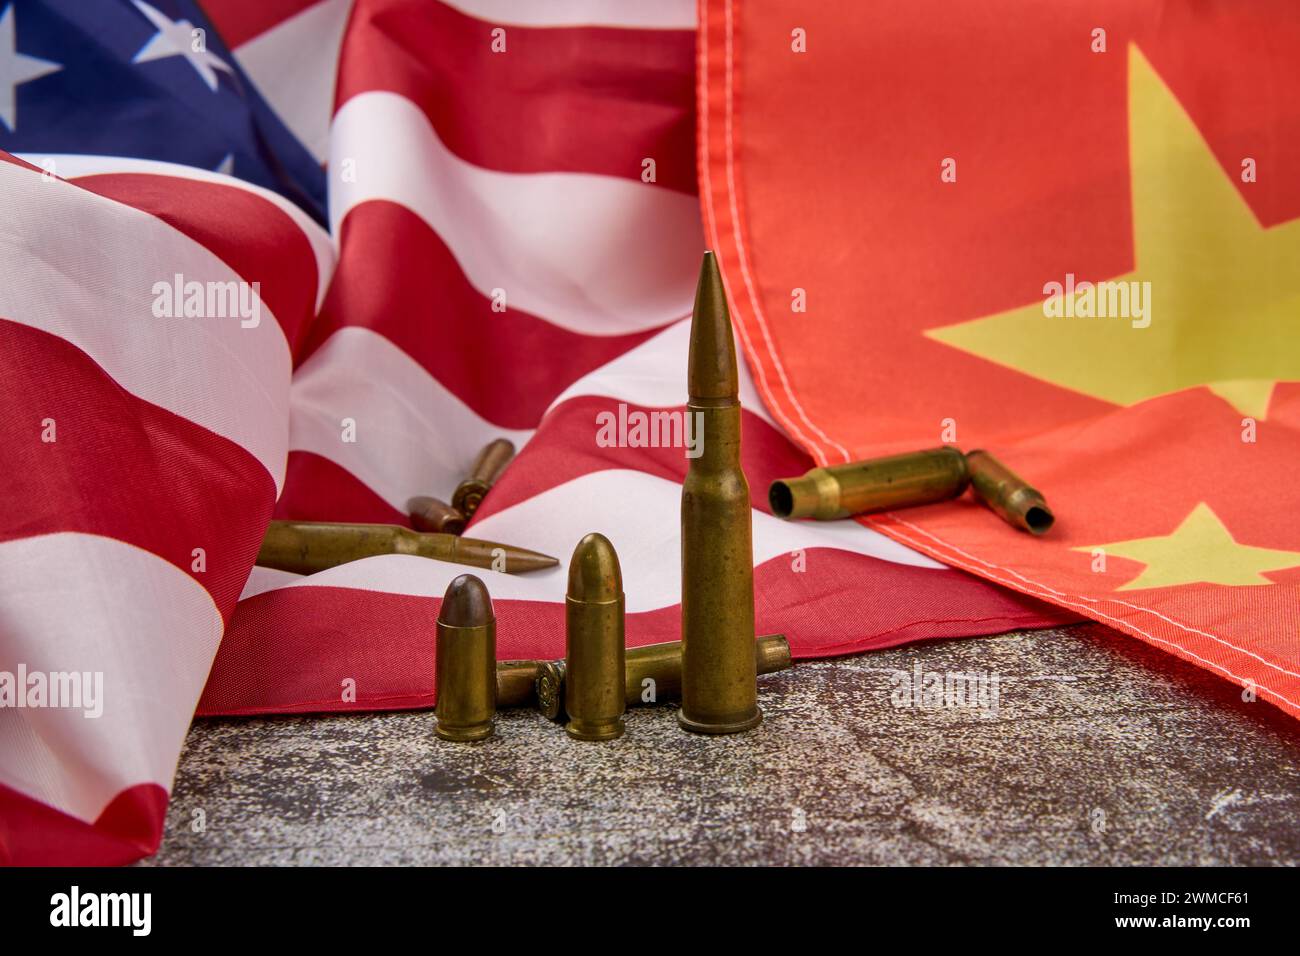 Ammunition rounds placed on the flag of the United States and China Stock Photo